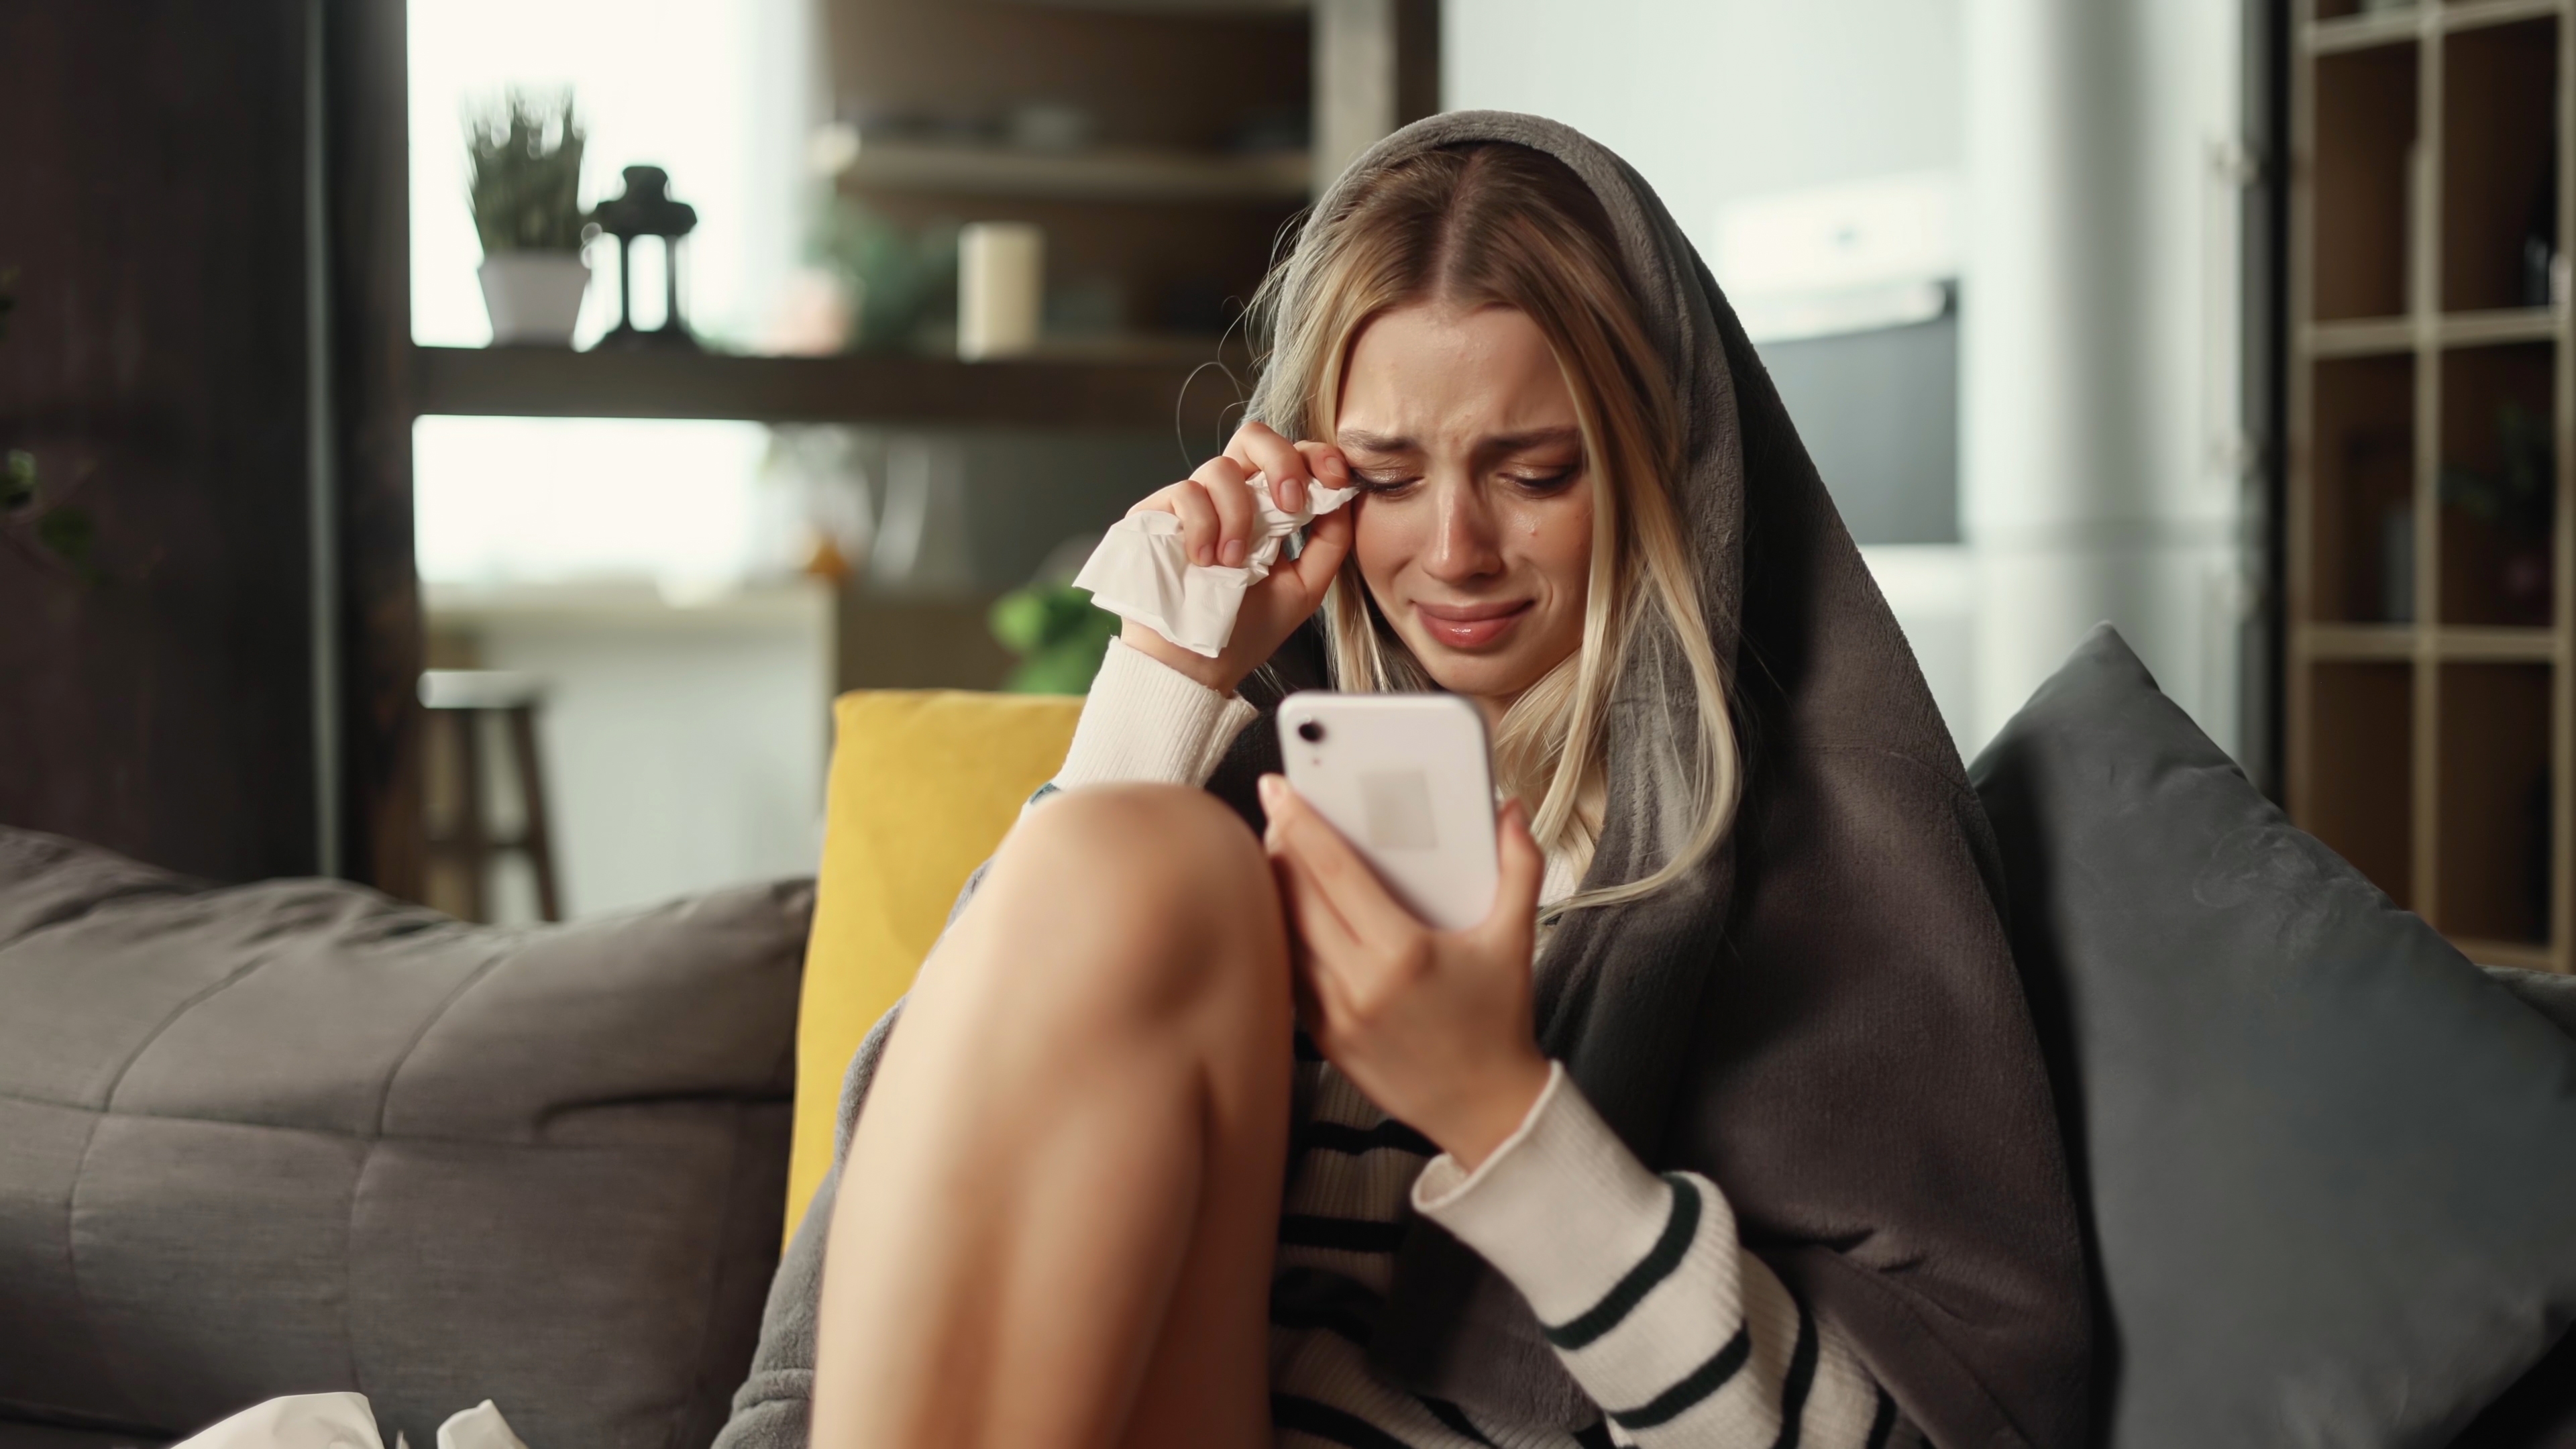 A woman crying while looking at her phone | Source: Shutterstock